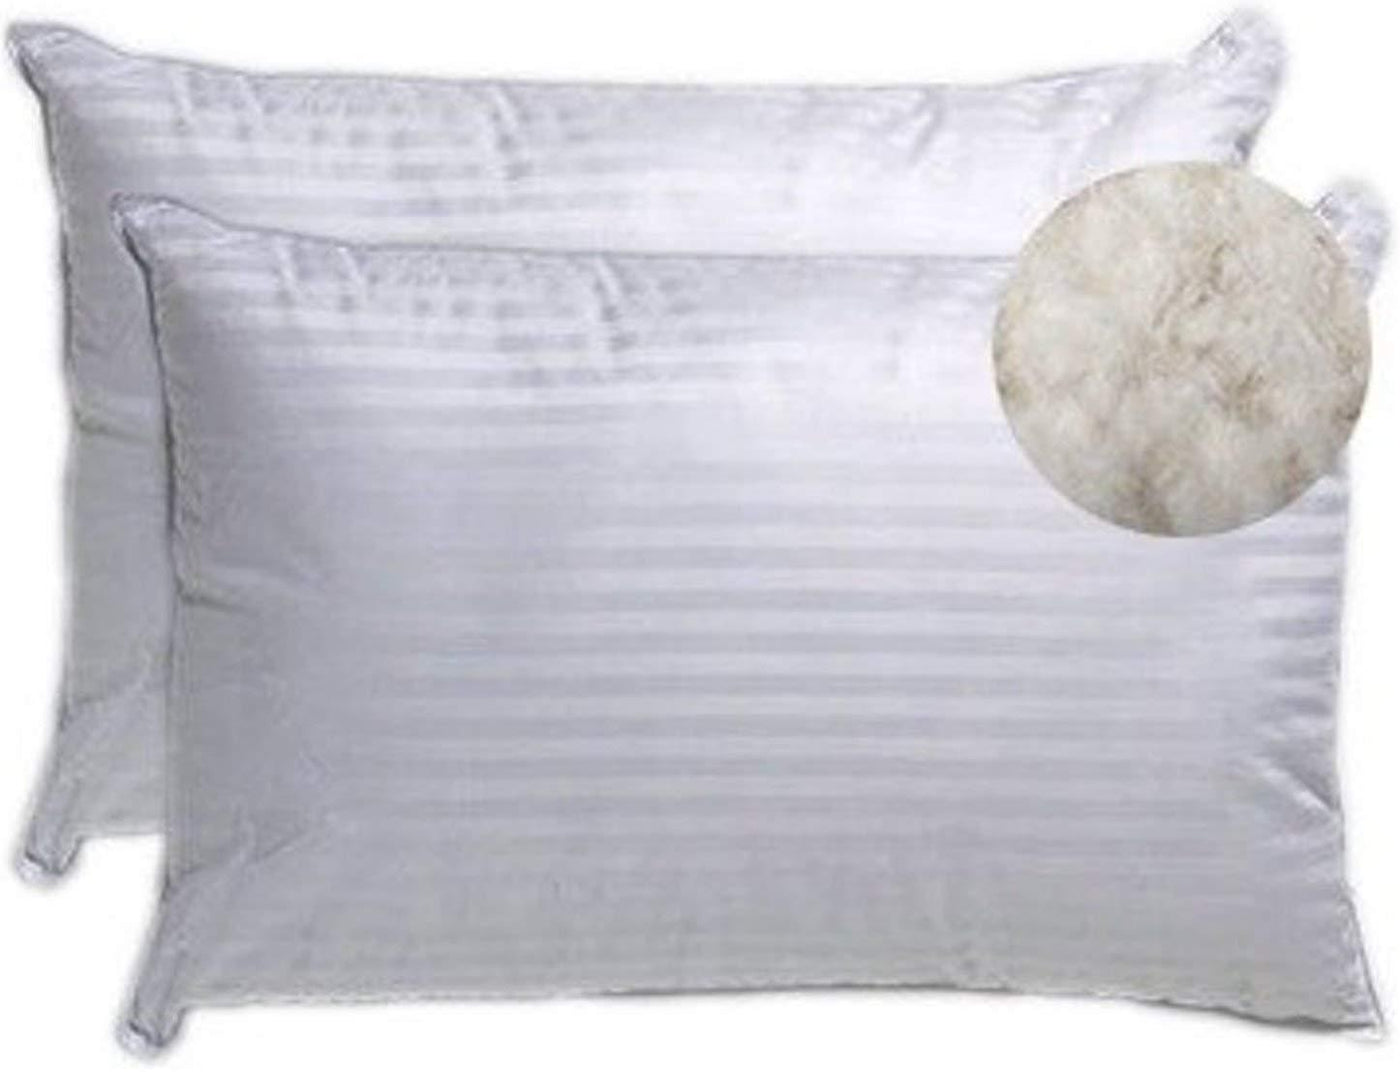 Trance Home Linen Super Soft Cotton Baby Pillow | Kids Pillow with 2 Pillow Covers